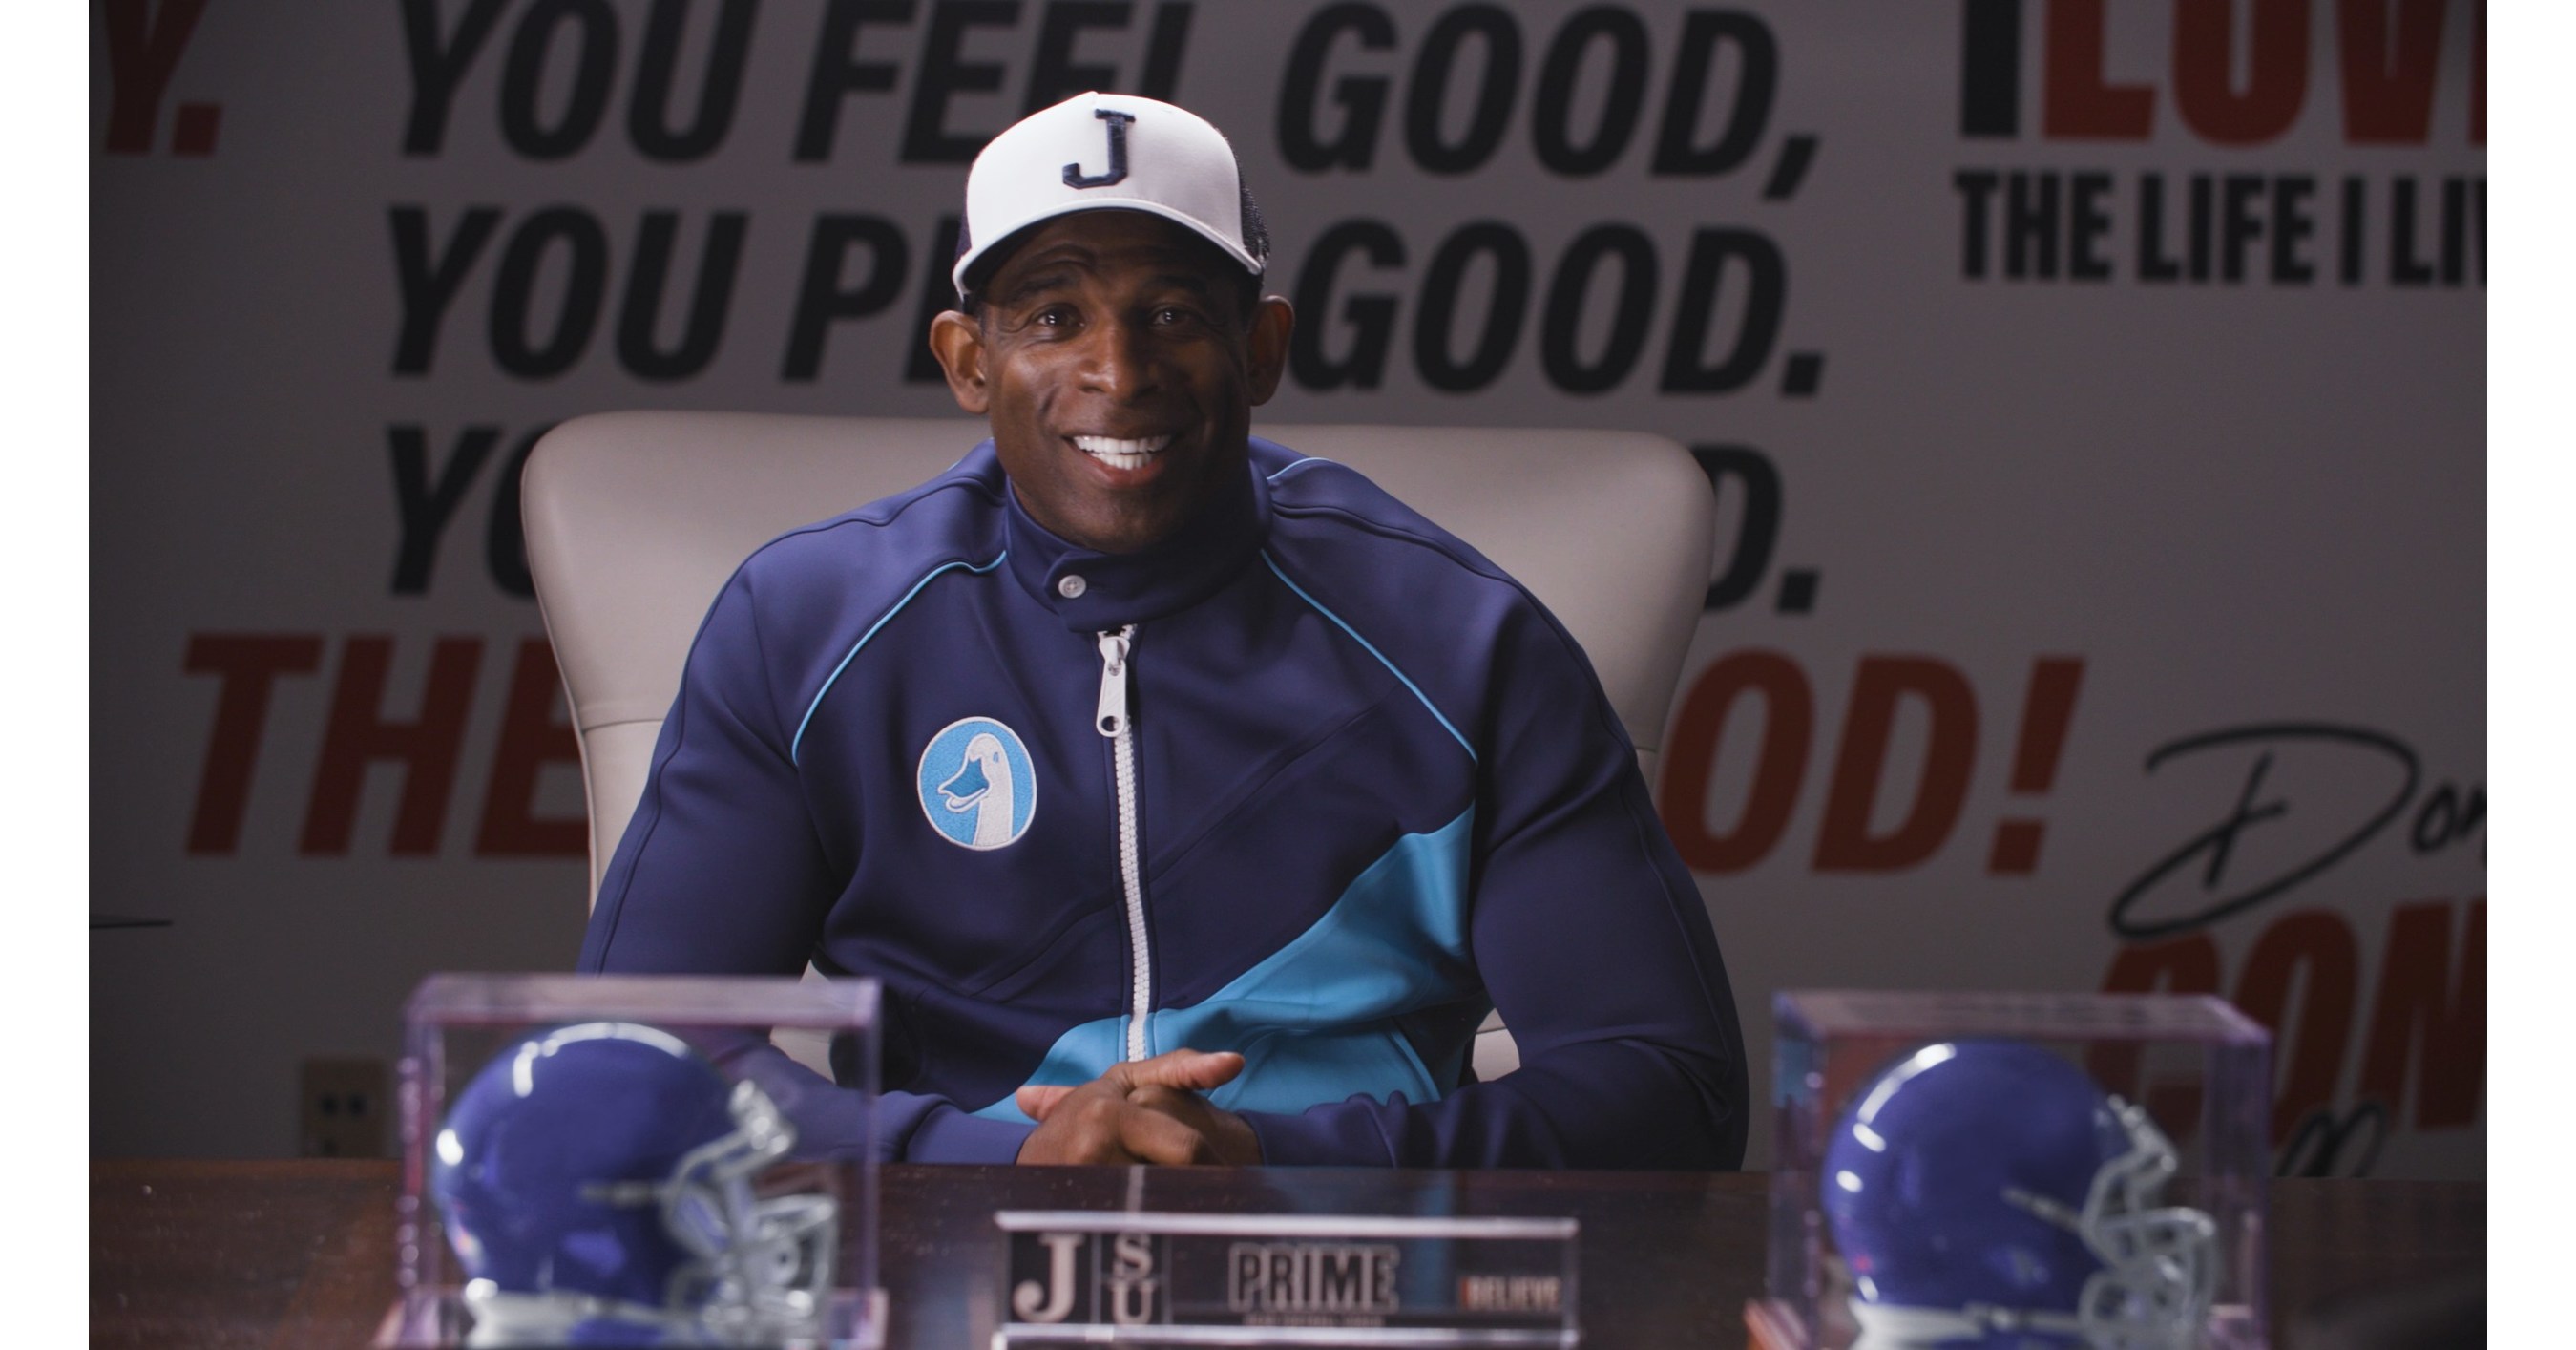 Deion Sanders featured in NFL Draft commercial - HBCU Gameday